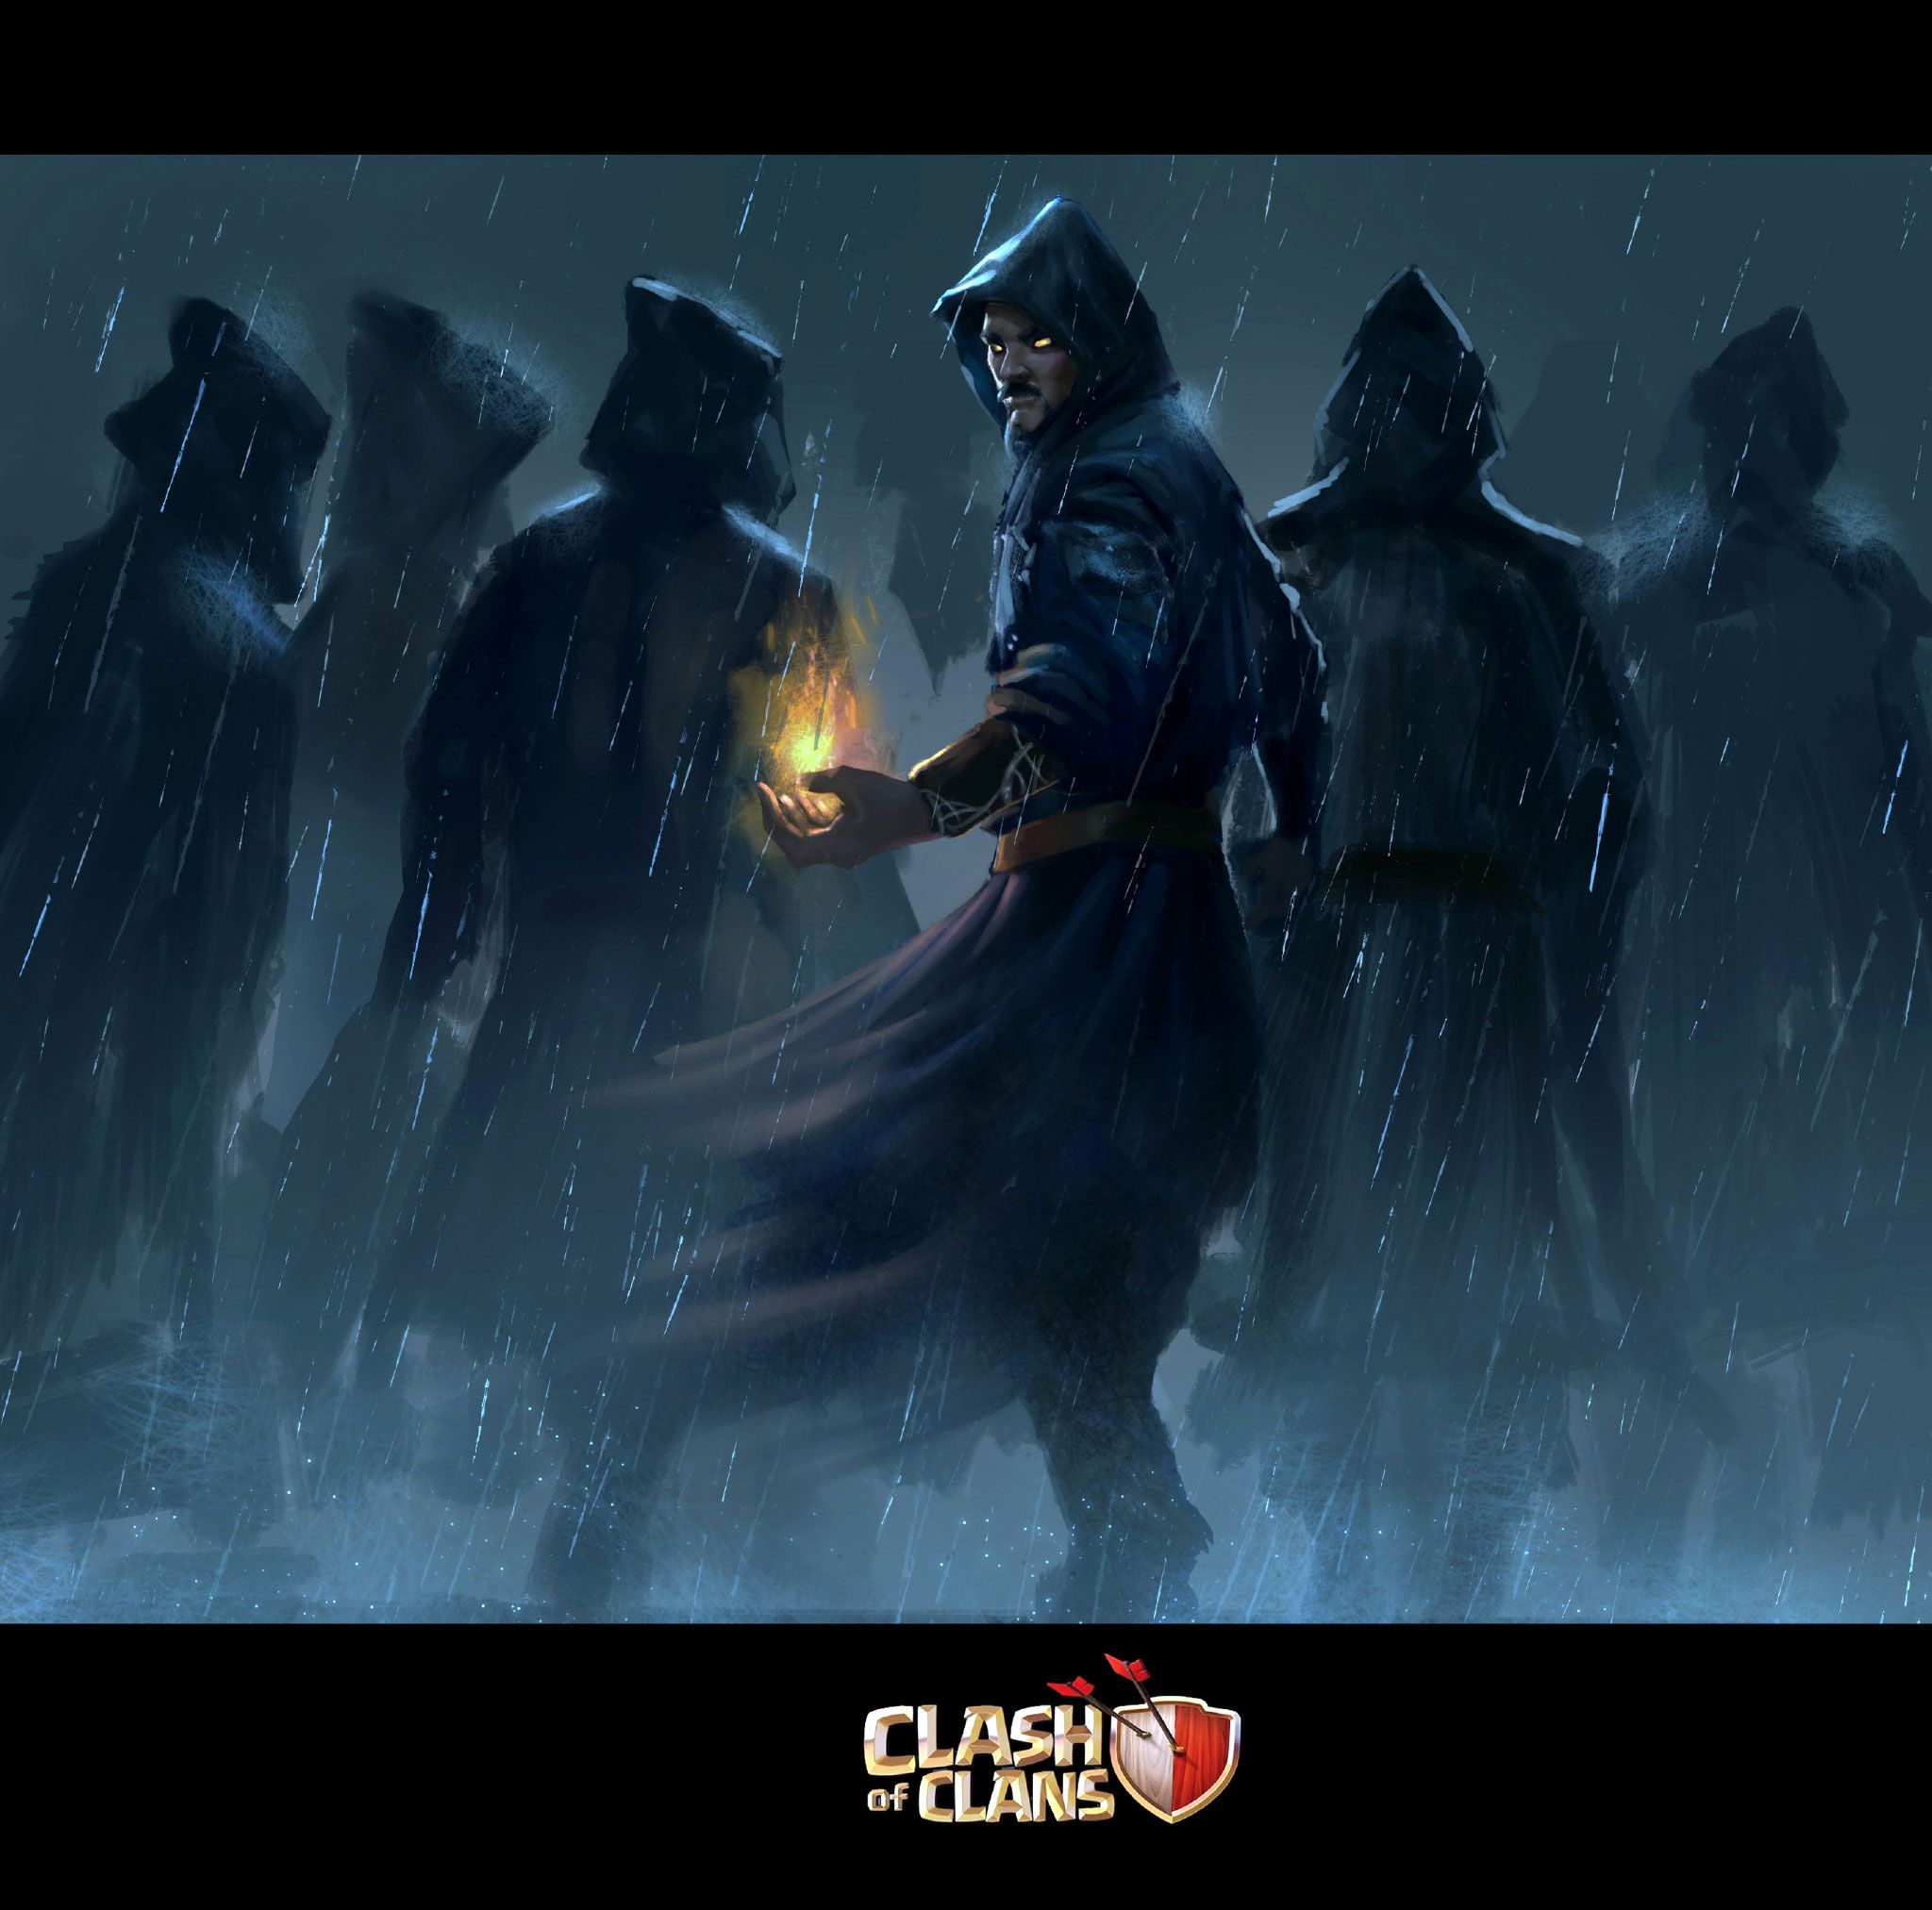 Wizards In Rainy Night Wallpaper clash of clans raiders